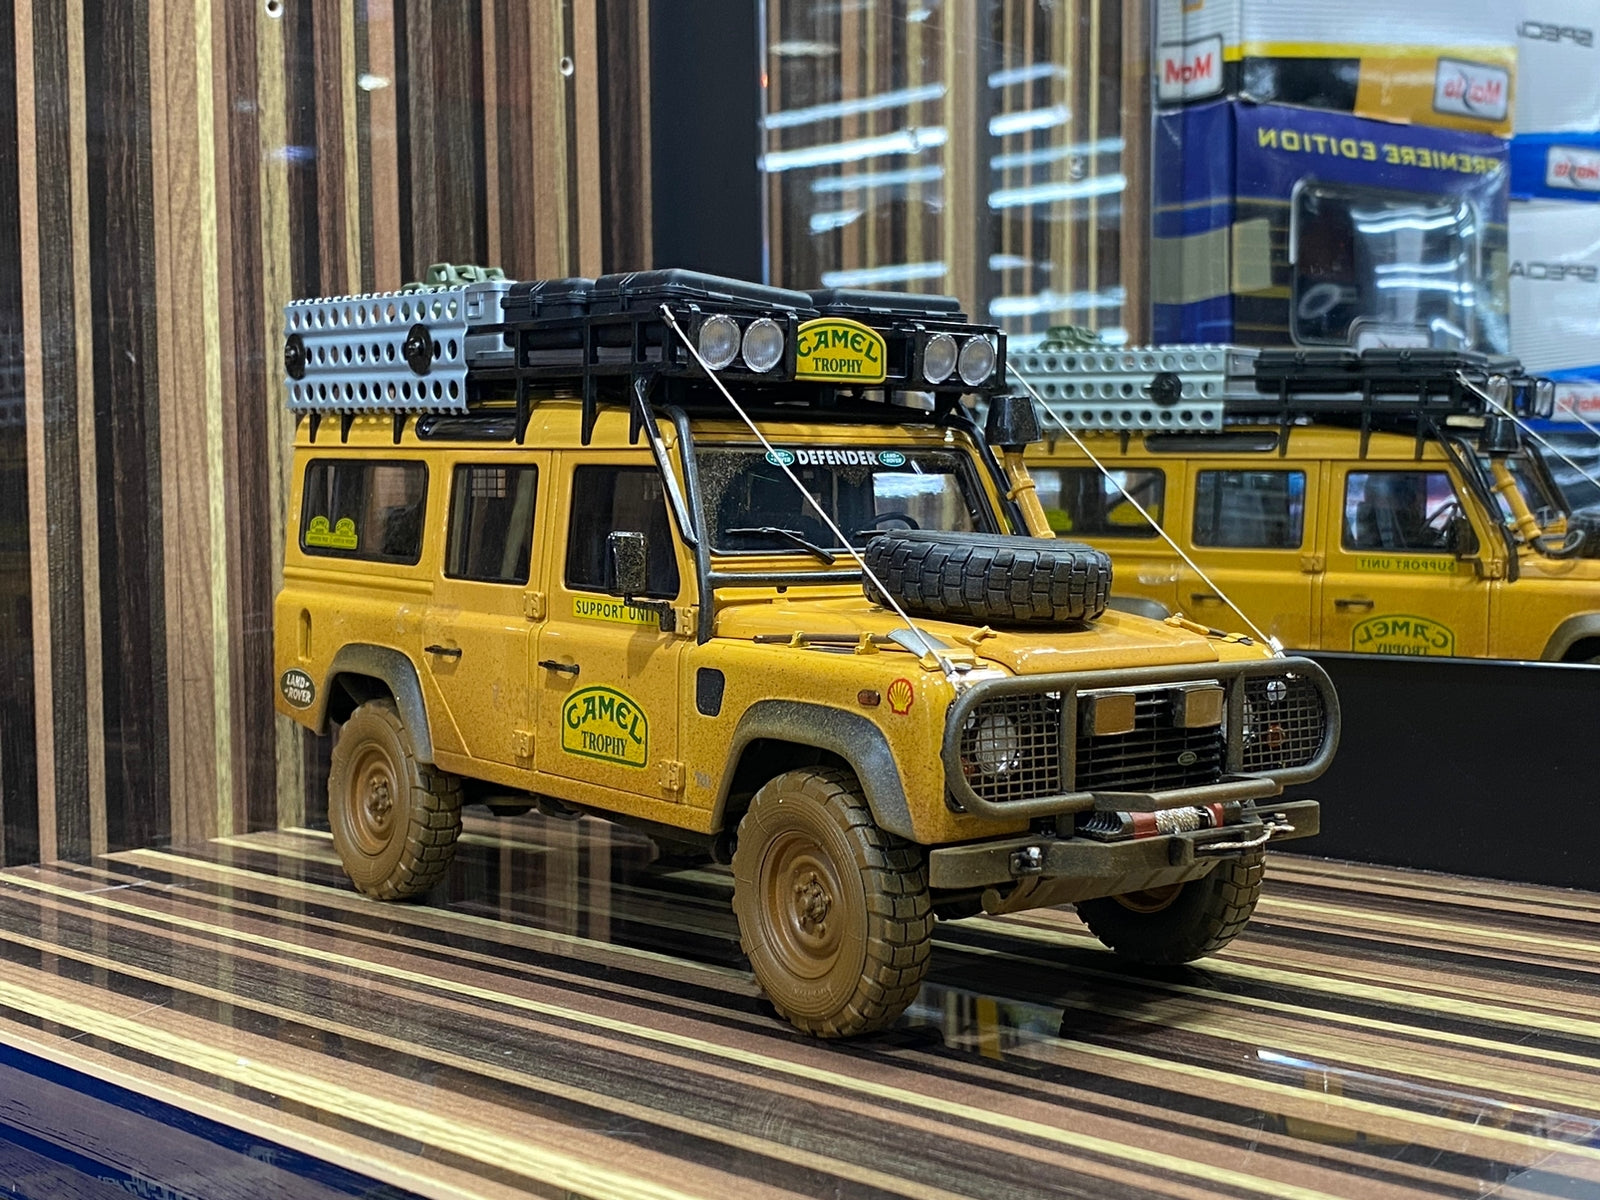 1/18 Diecast Land Rover Defender 110 "Camel Trophy Sabah-Malaysia" Dirty Version 1993 Yellow Almost Real Model Car